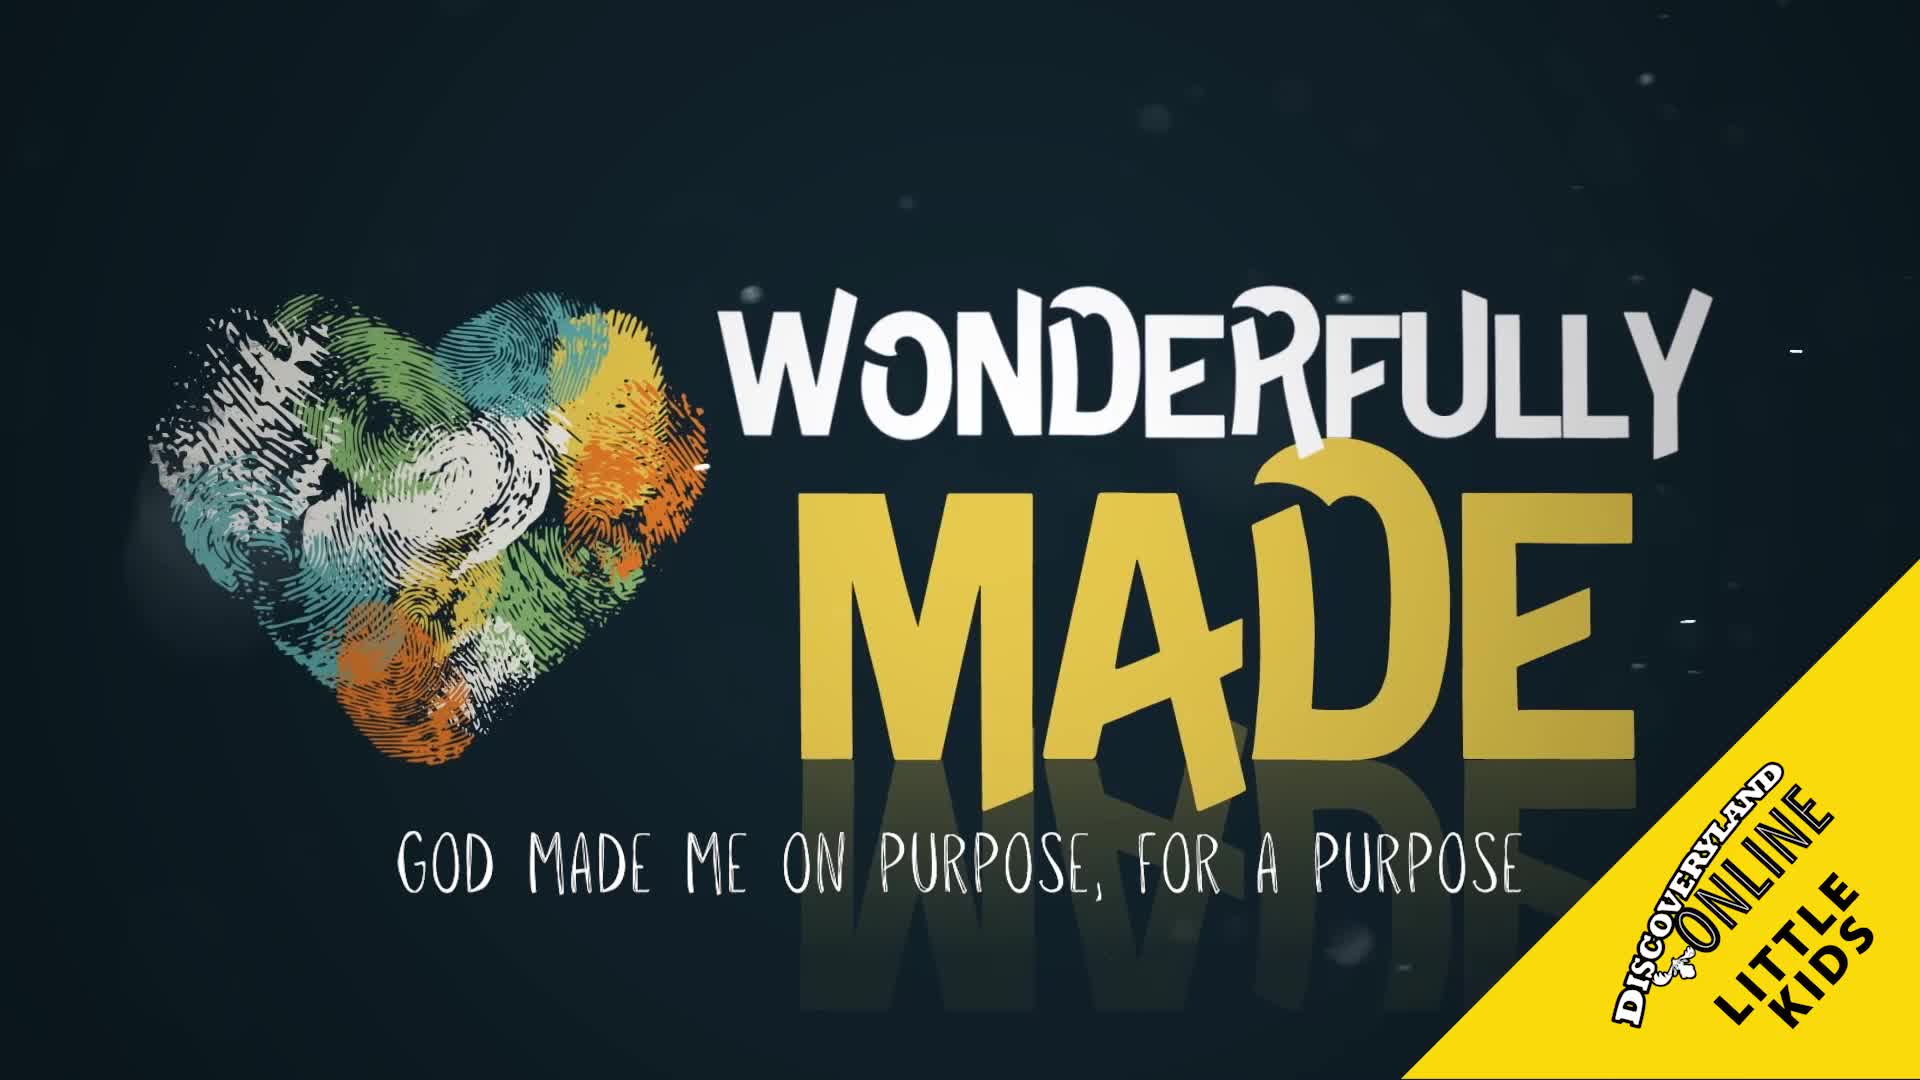 God Made Me On Purpose, For A Purpose